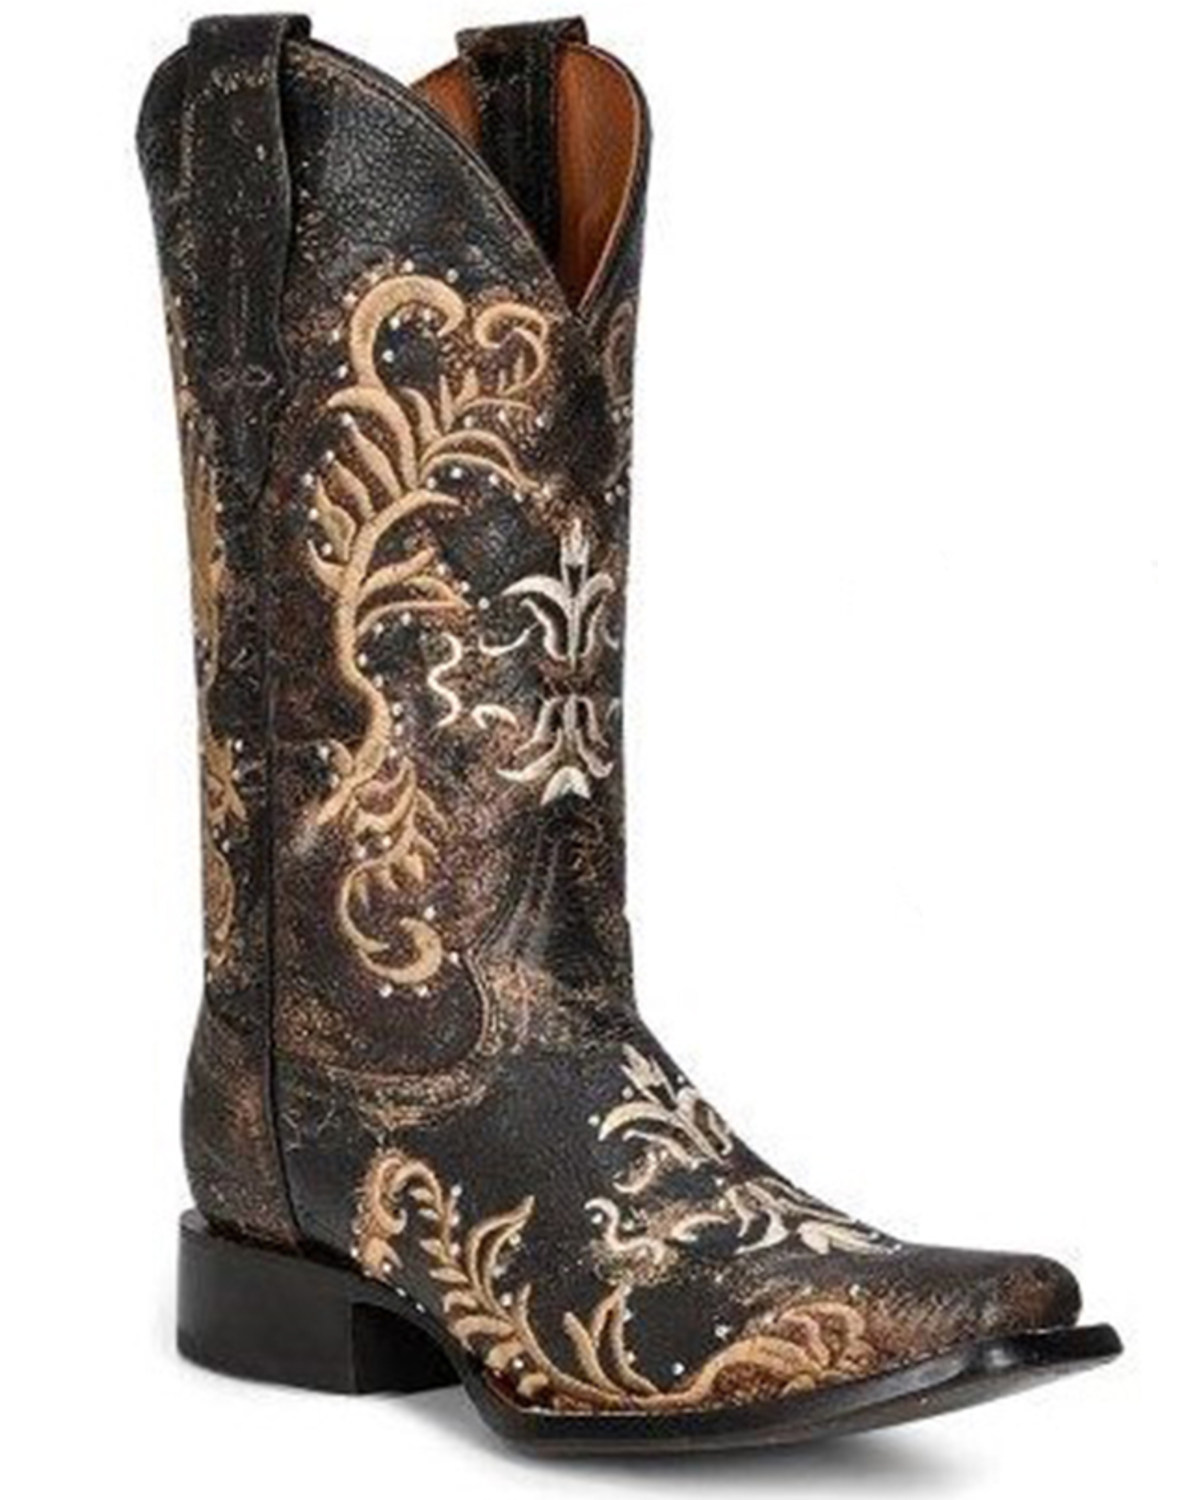 Corral Women's Embroidered & Studded Distressed Tall Western Boots - Square Toe